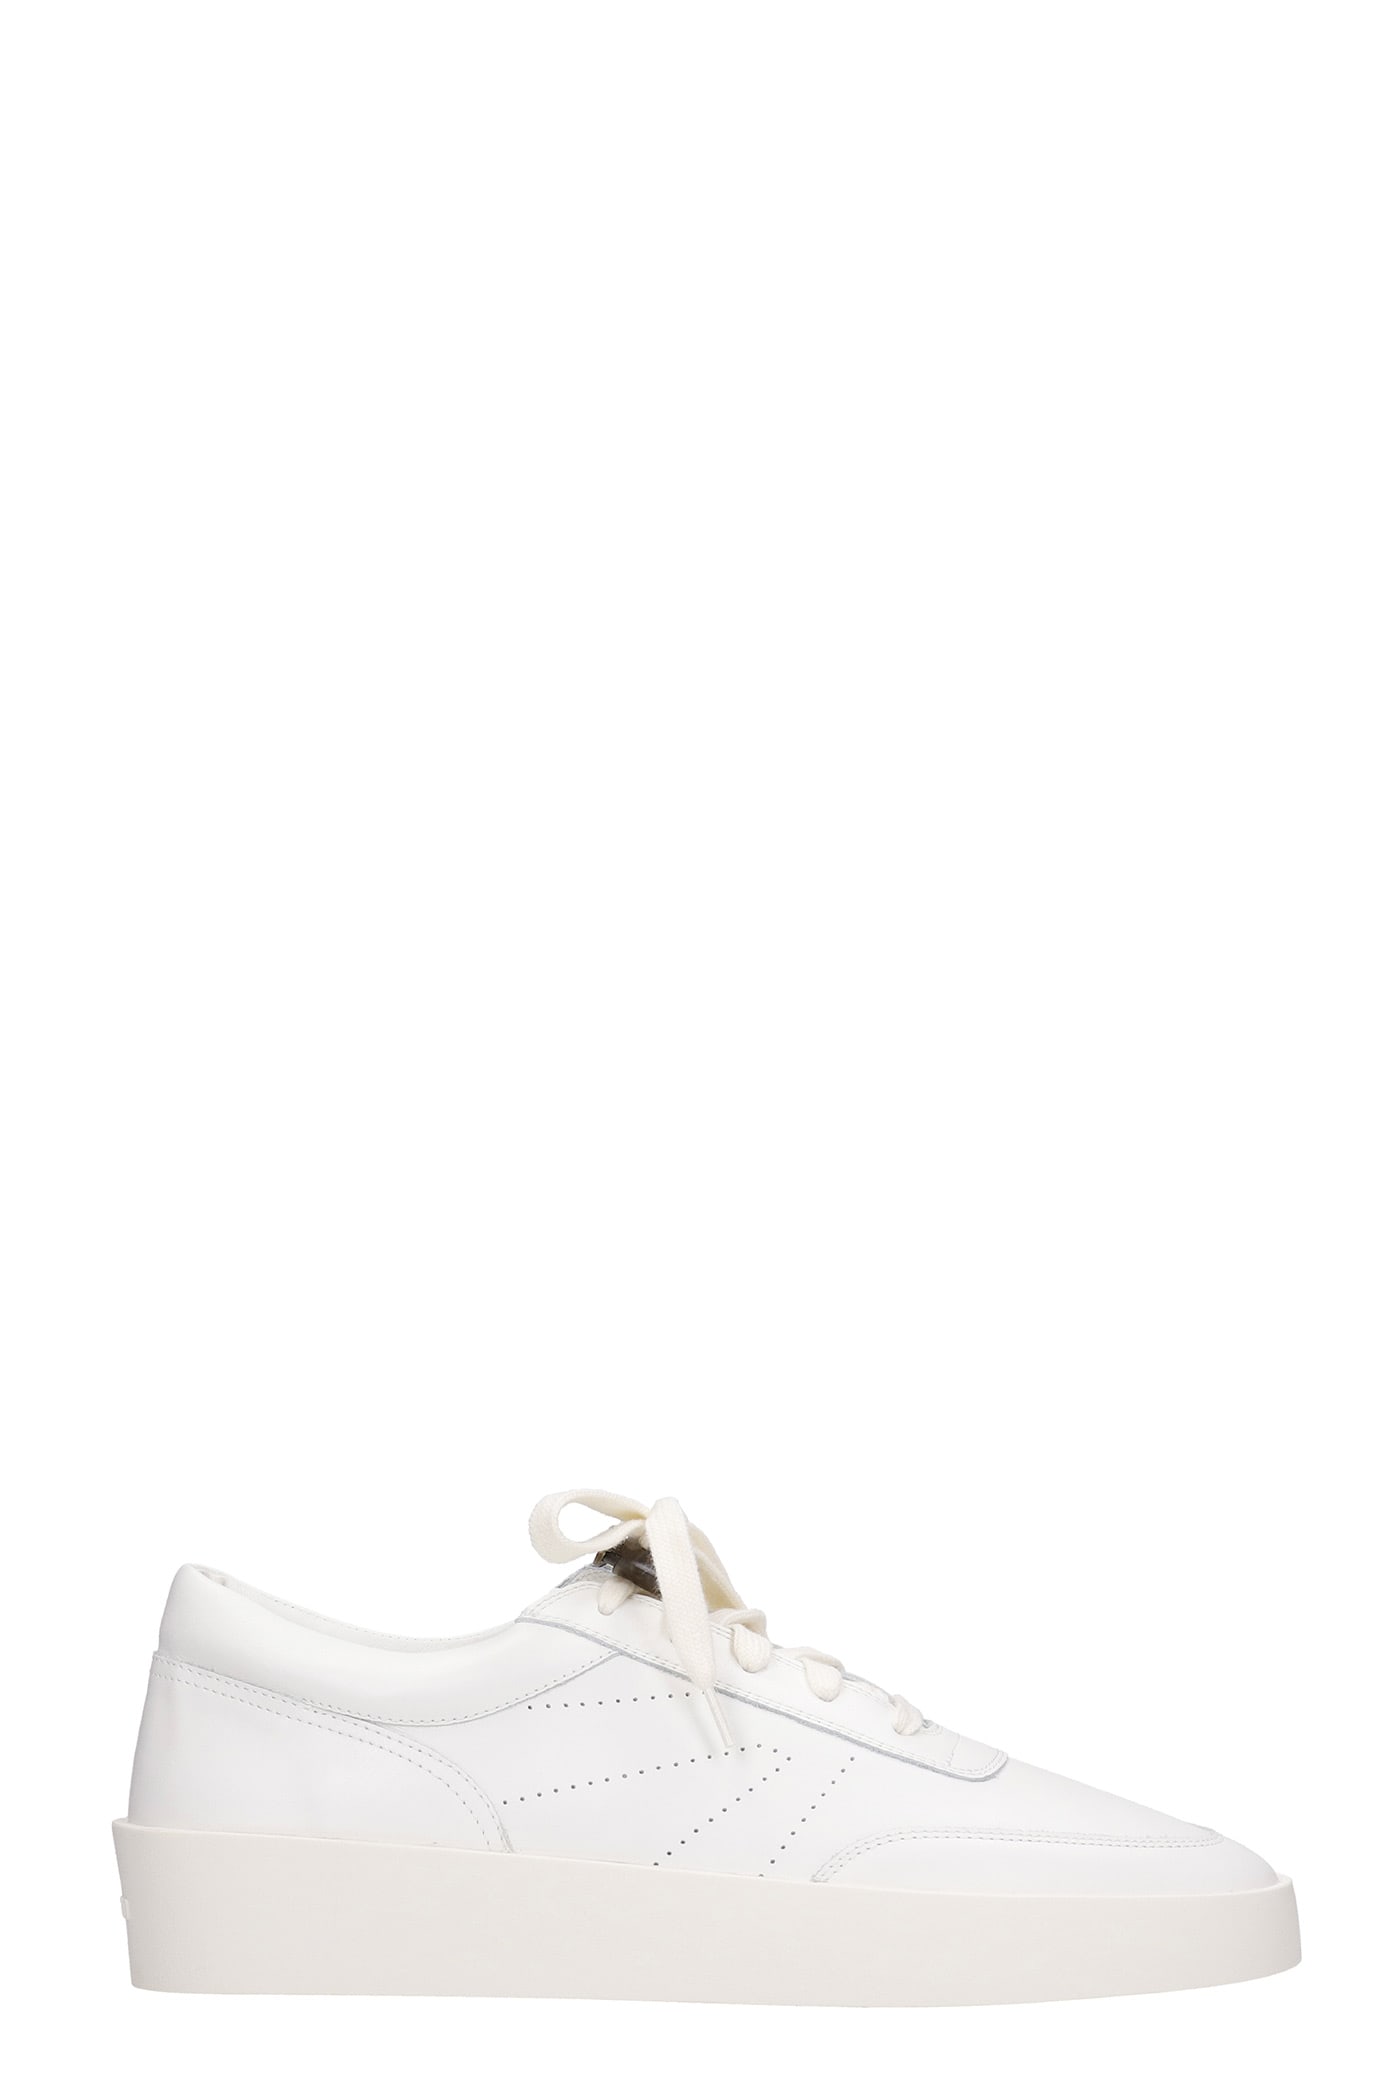 Fear of God Sneakers In White Leather